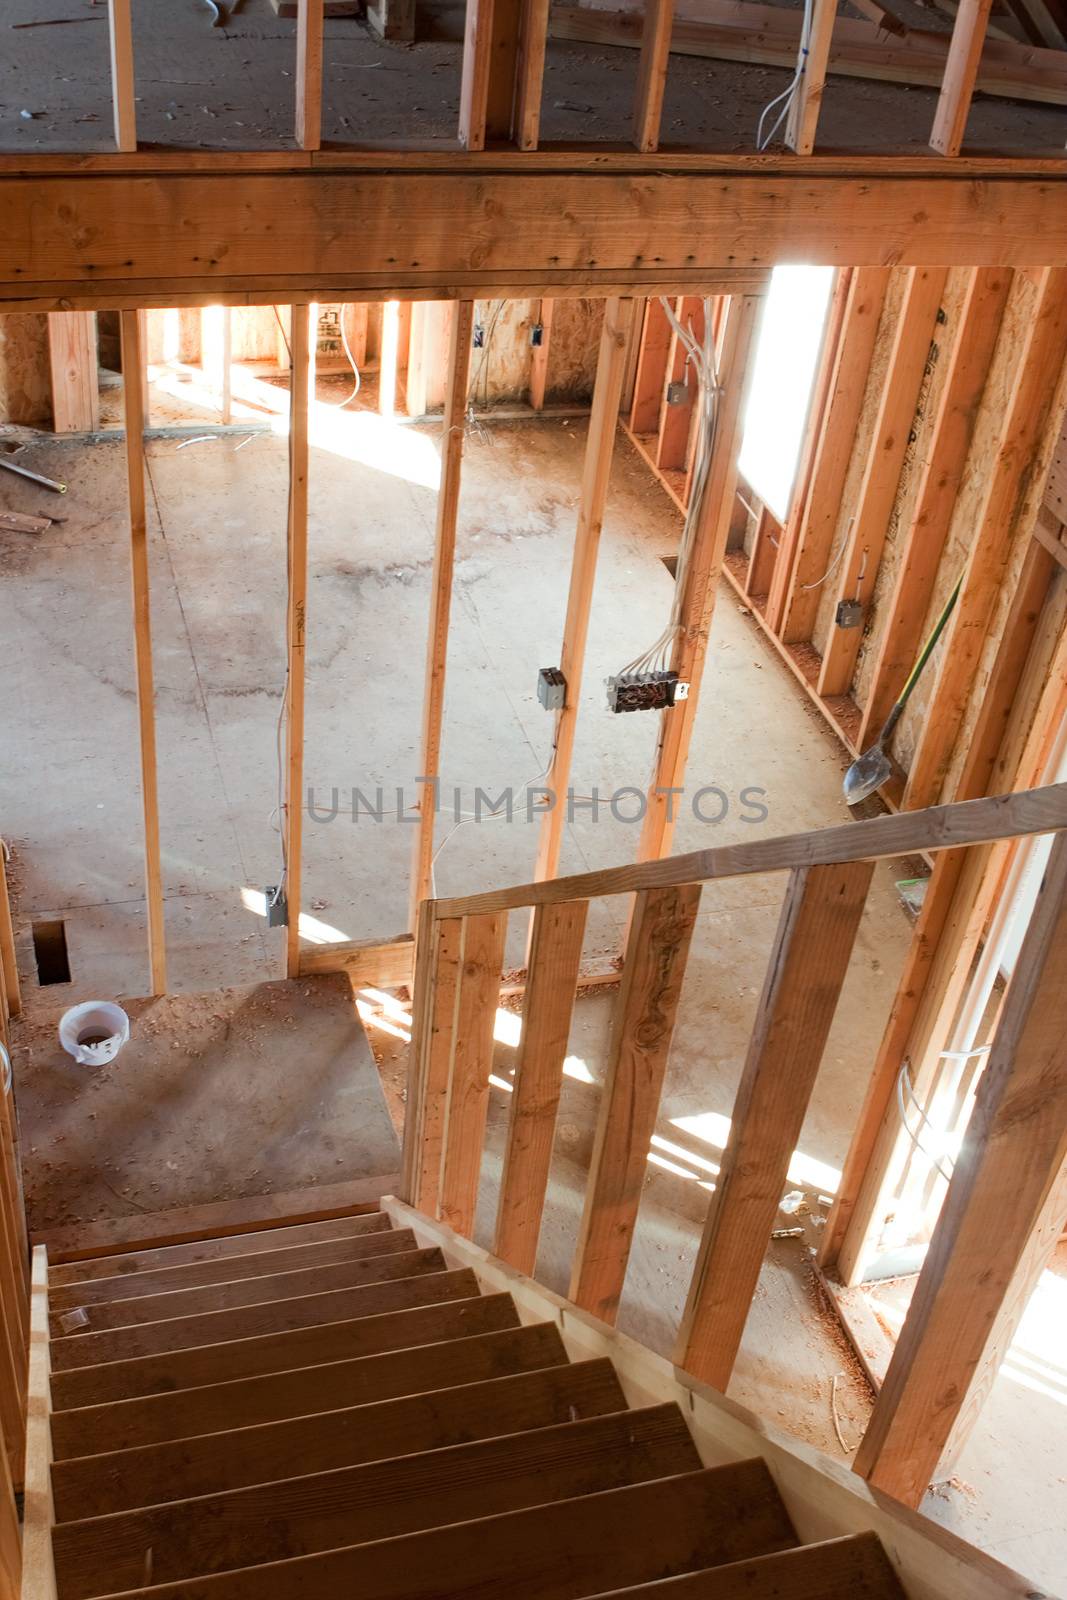 House Framing Interior by graficallyminded